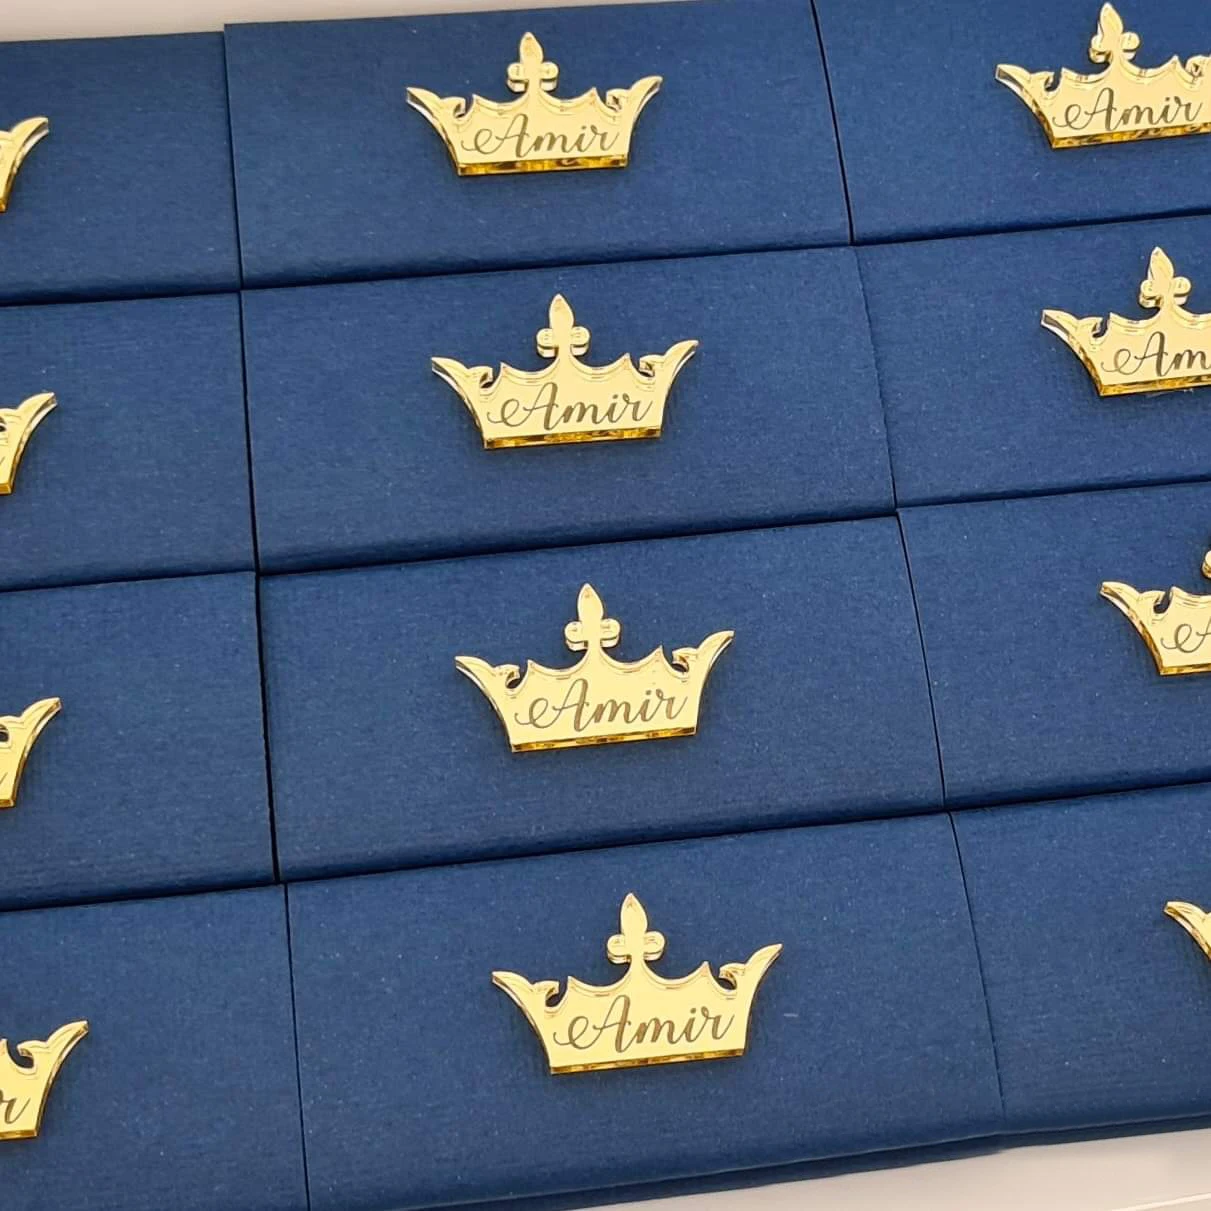 

50 Pcs Personalized Baby Name Gold/Silver Crown Tag Custom Princess Name Birthday Baptism Party Chocolate Bars Center Decoration